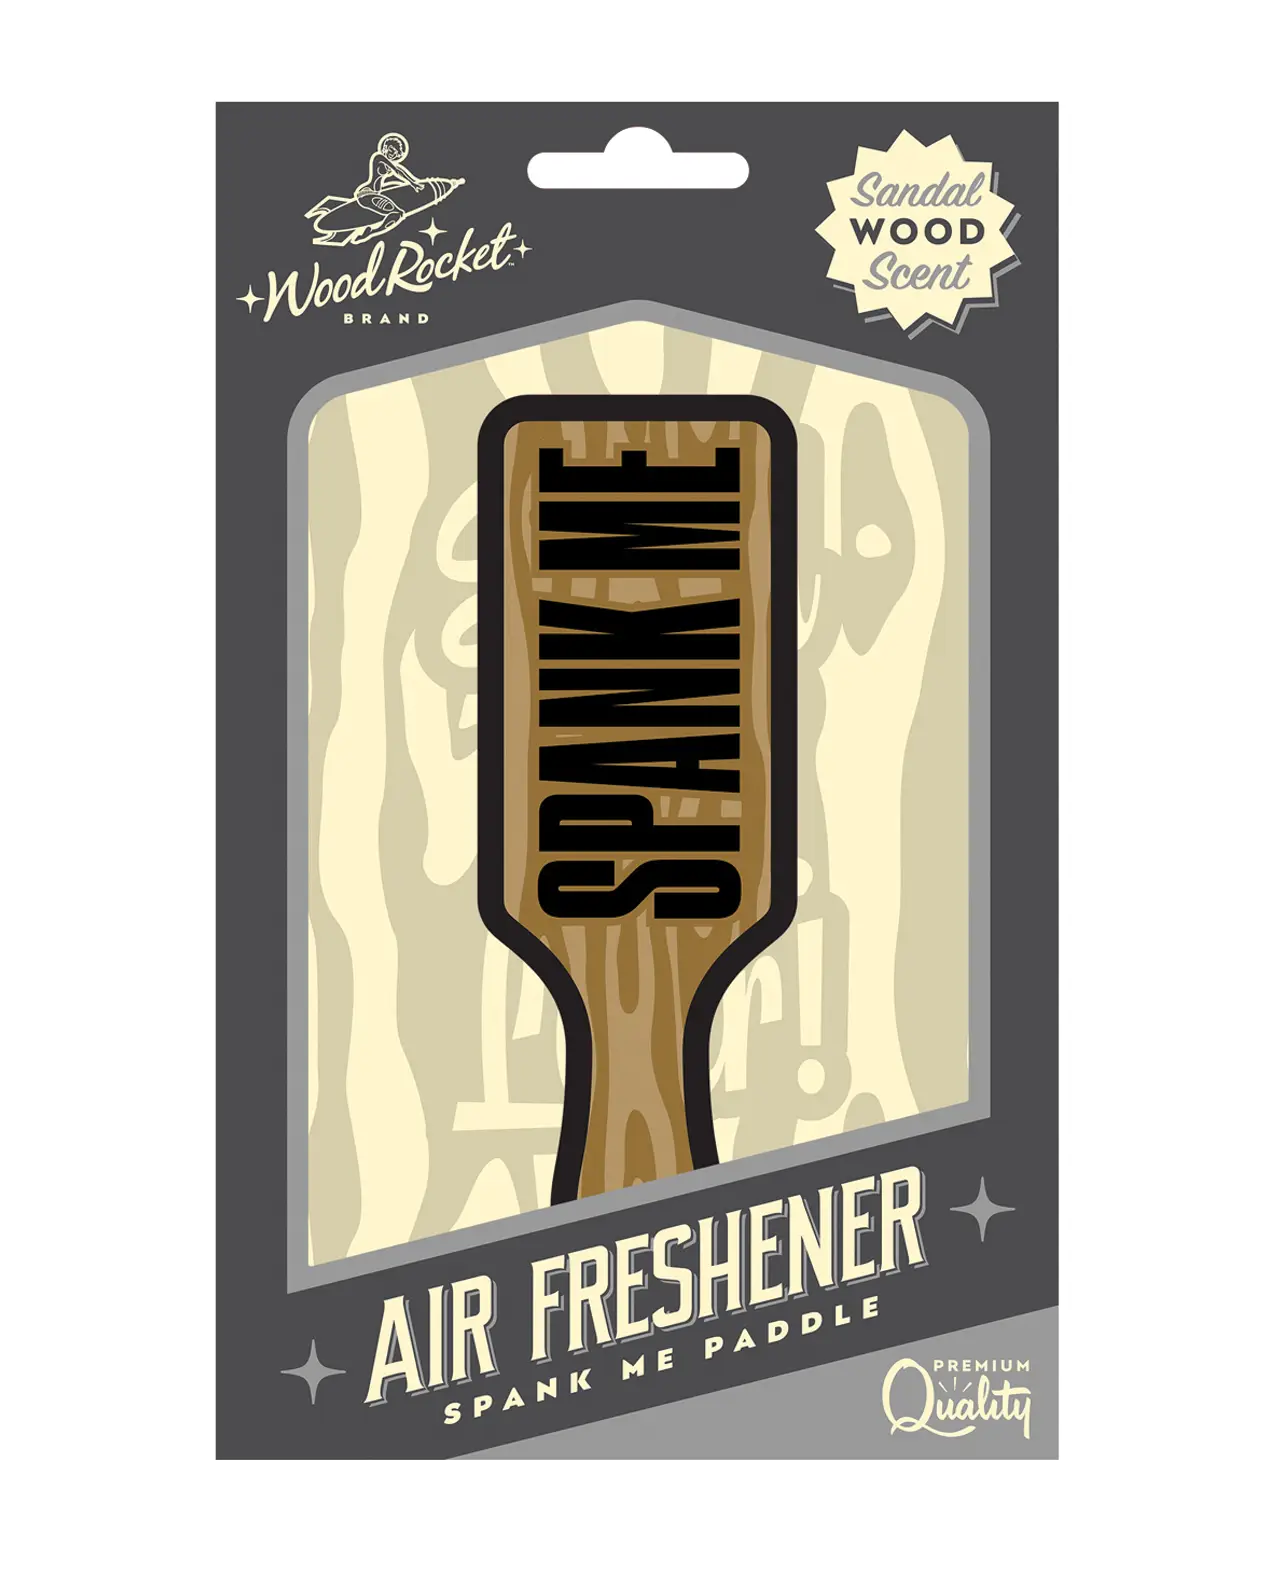 “Spank Me Paddle” cardboard paper Air Freshener! Featuring a Sandal Wood Scent.